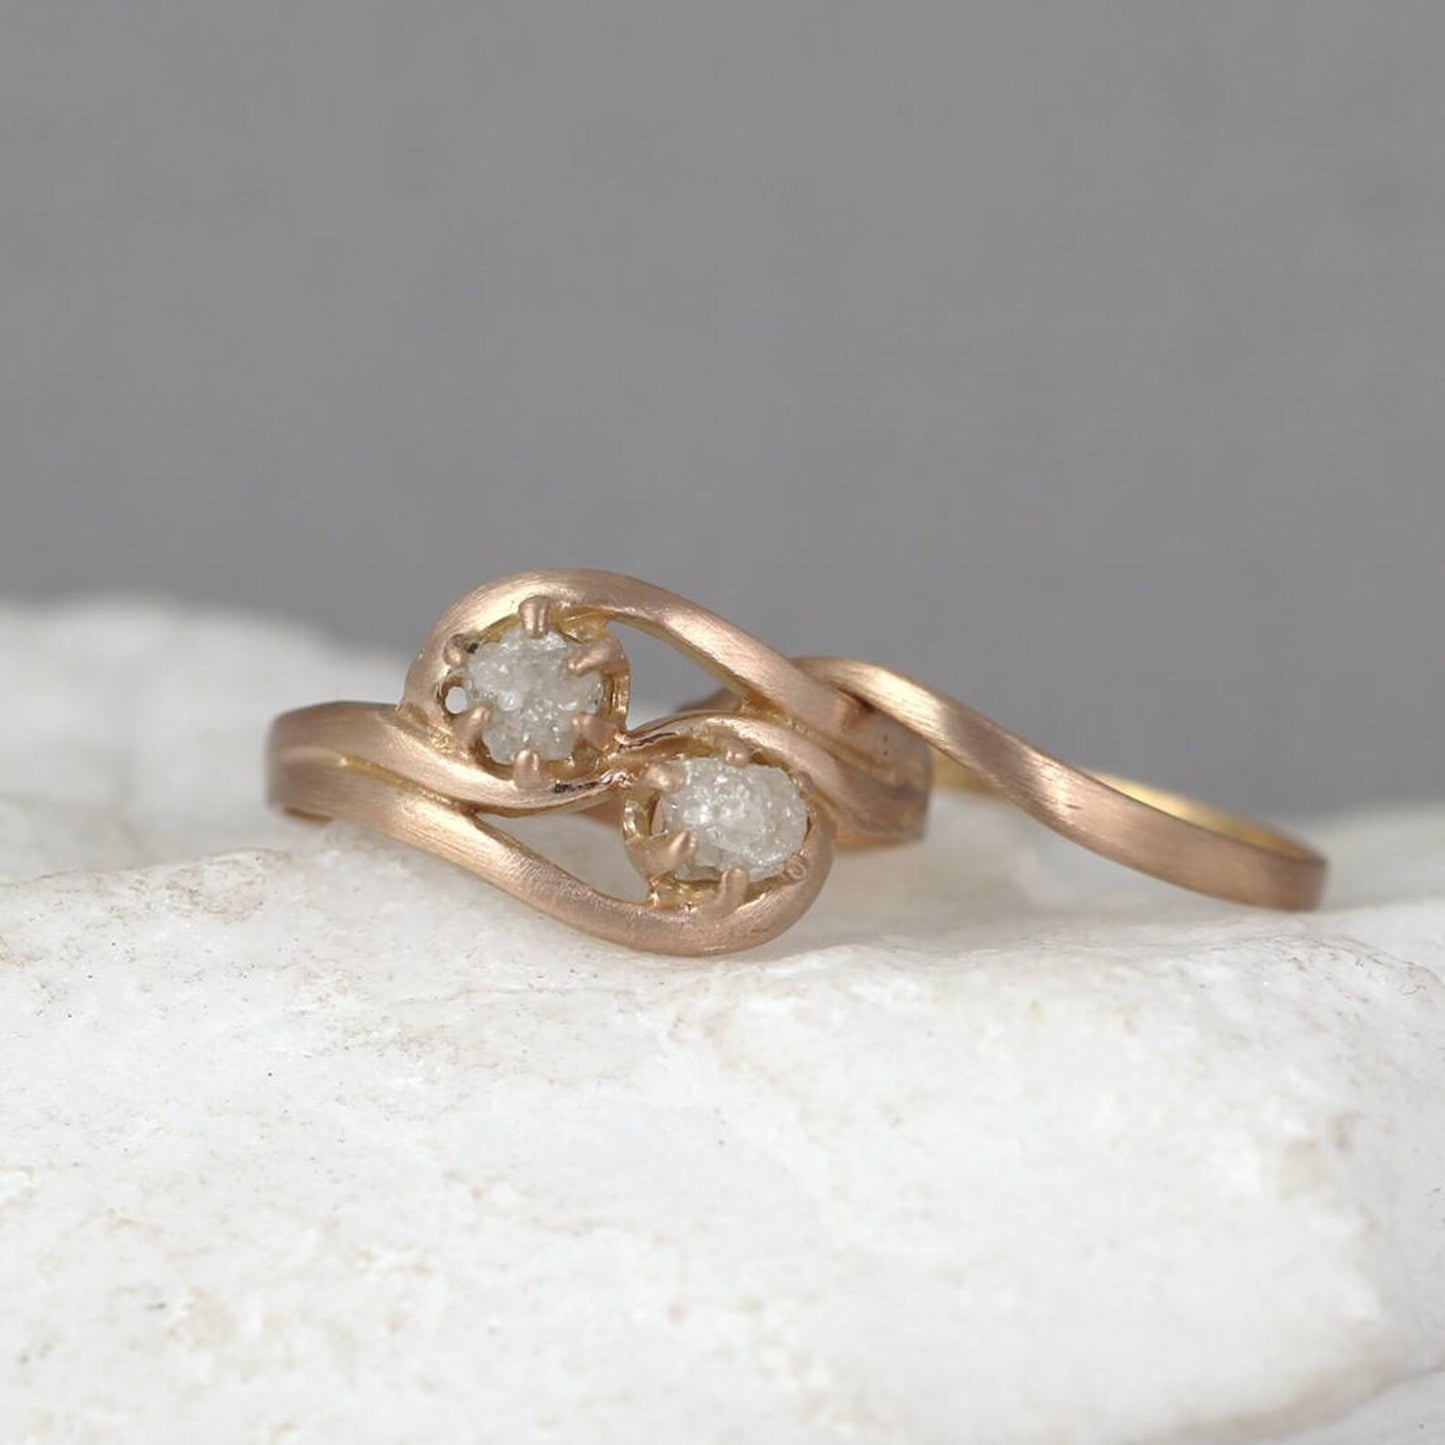 Rose Gold Two Stone Raw Diamond Engagement Ring & Wedding Band Set - 2 Uncut Rough Diamonds - Forever and Always Diamond Duo Rings 14K Gold